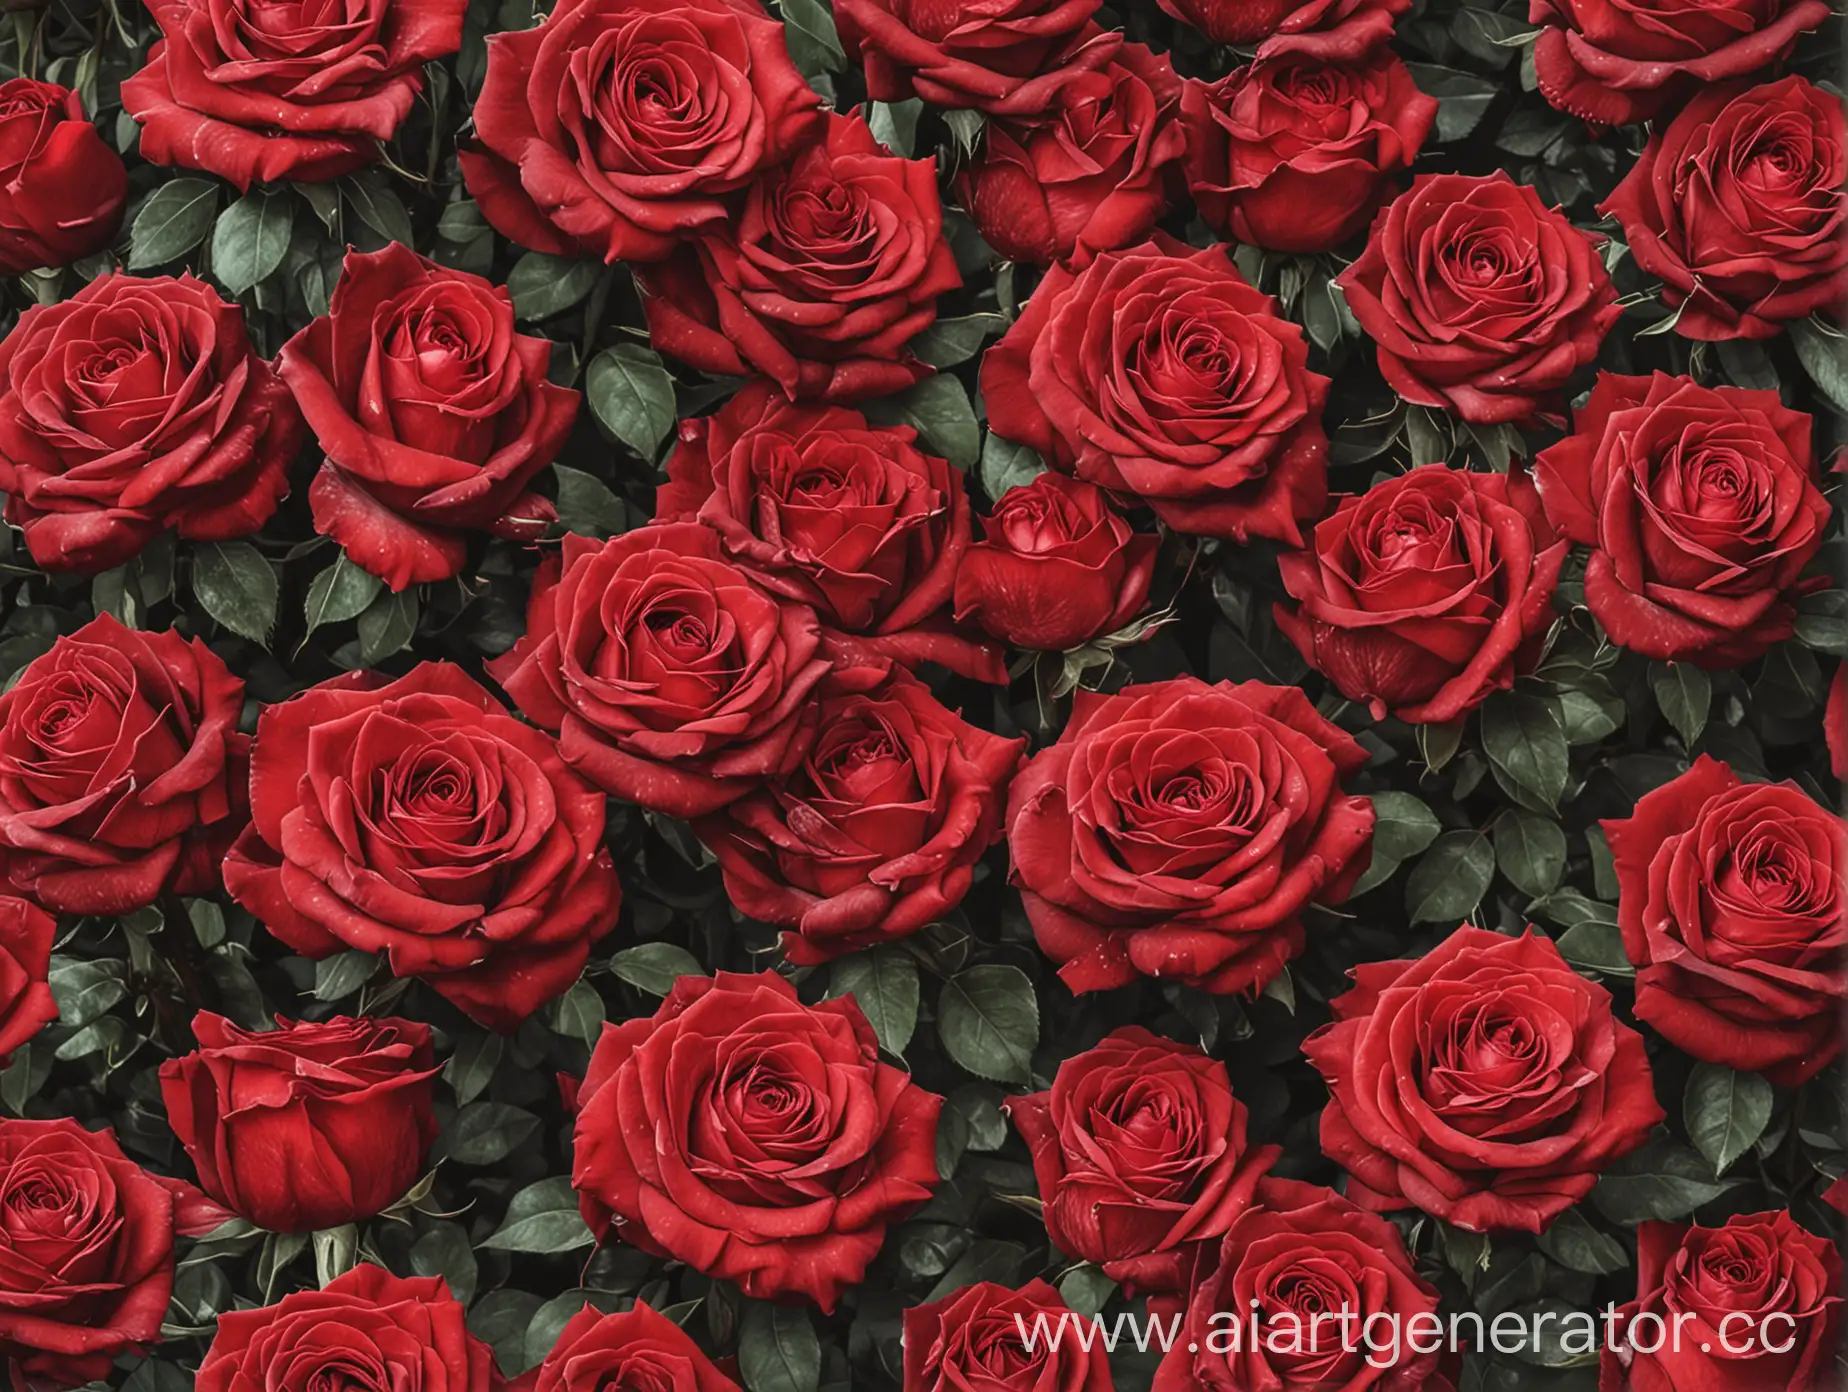 Vibrant-Red-Roses-in-Full-Bloom-Floral-Photography-Art